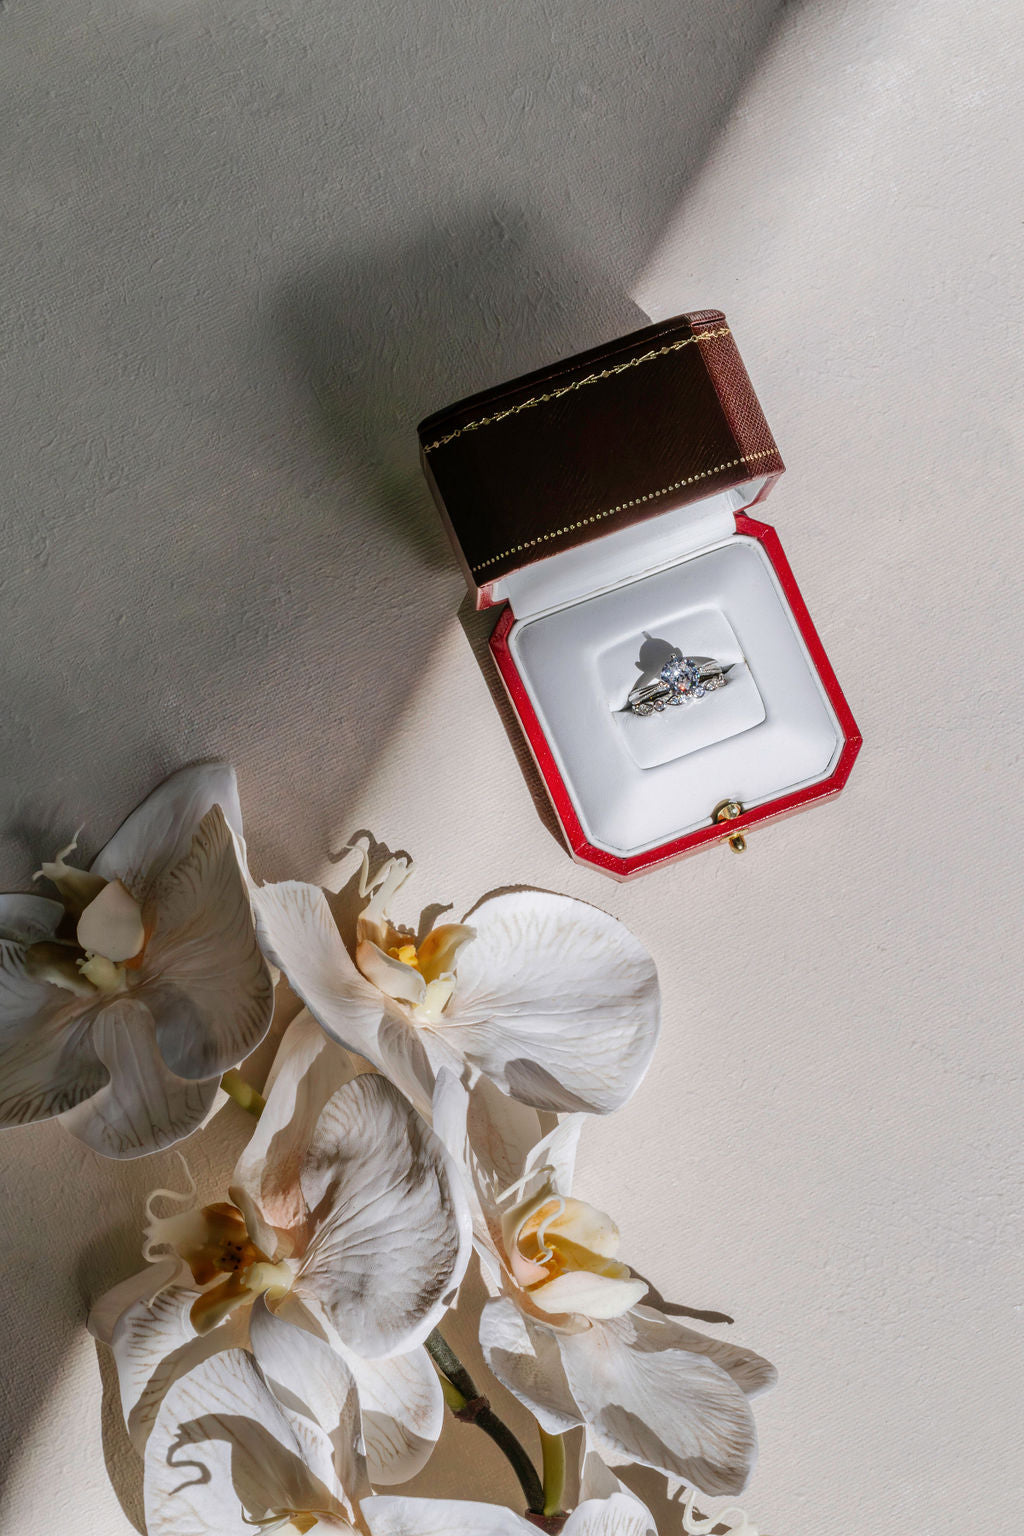 White orchids laid flat next to an engagement ring in a red Cartier box, symbolising love and elegance